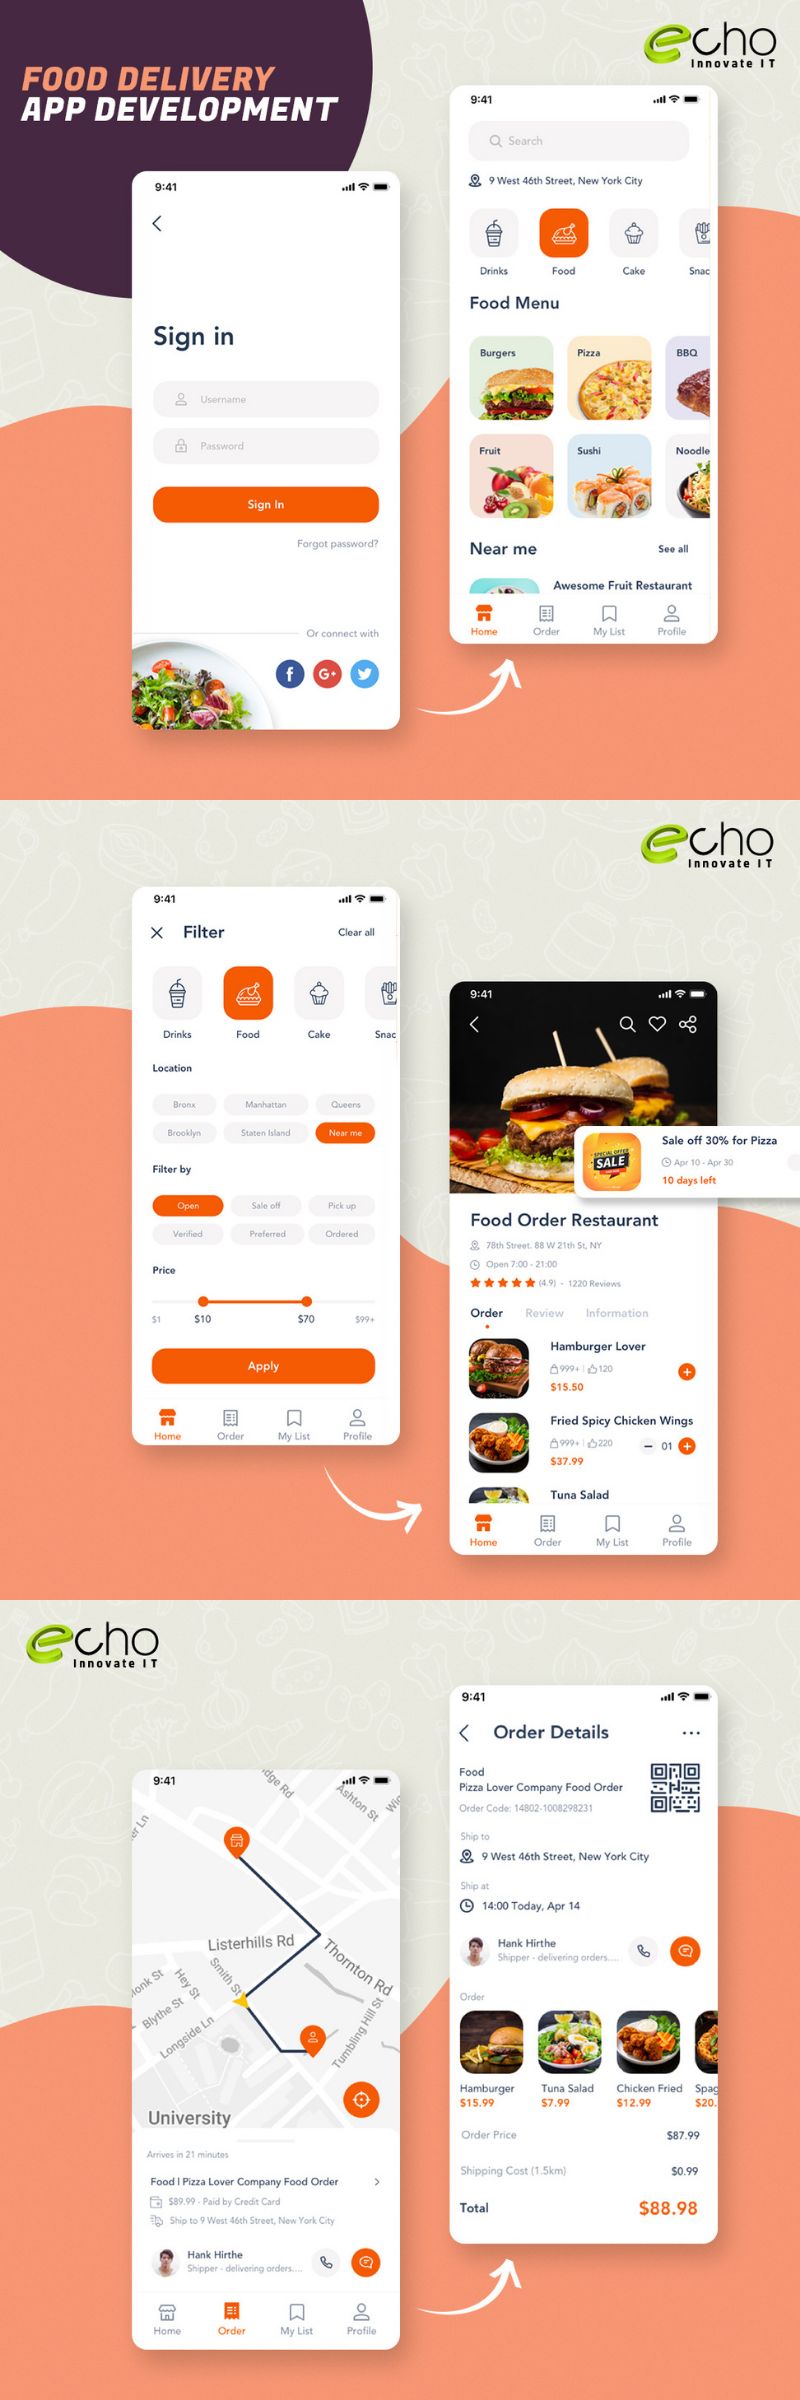 food delivery app development and design